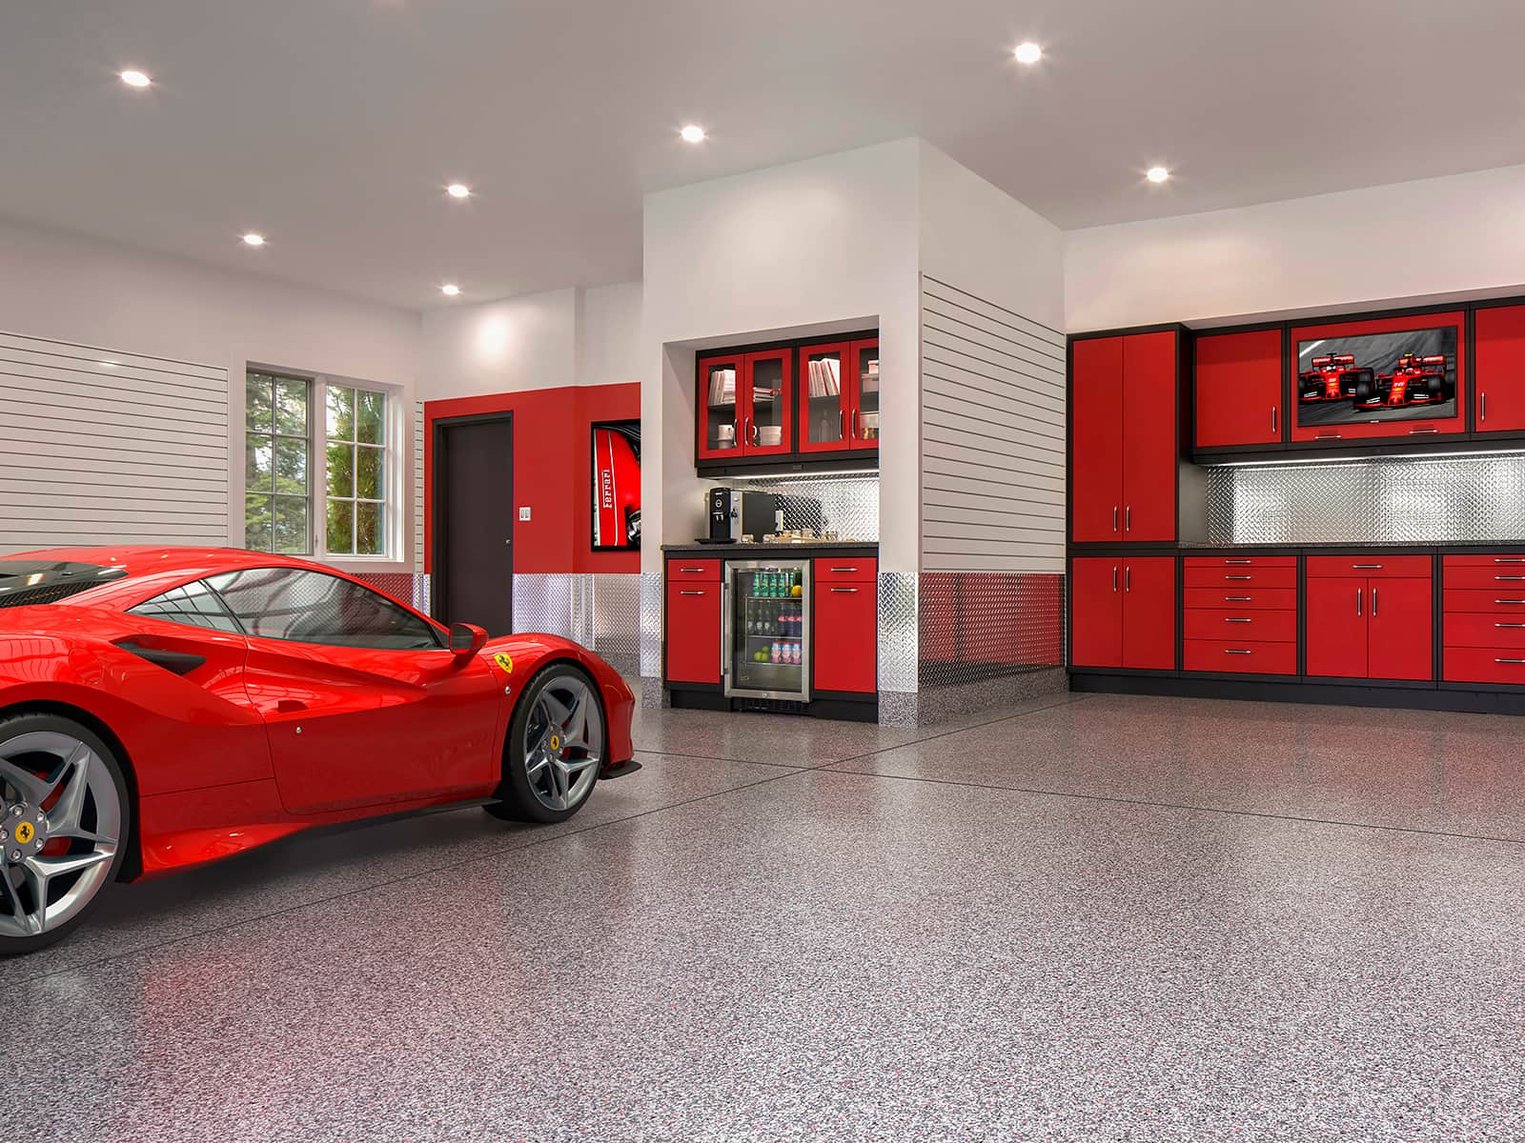 10 Amazing Garage Before And After Remodels To Inspire You